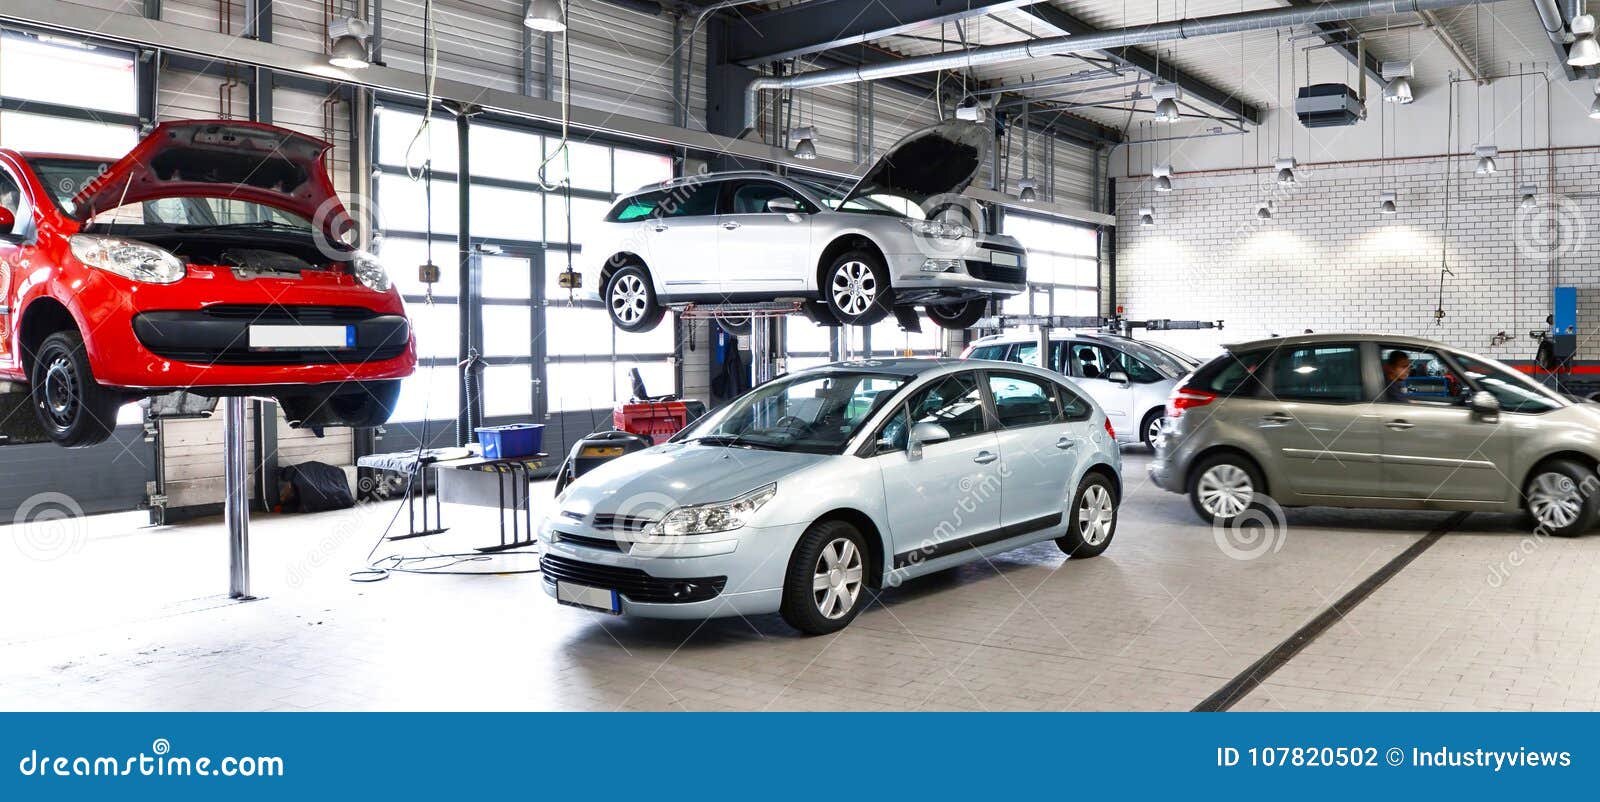 vehicles in a car repair shop for the repair with lifting platform